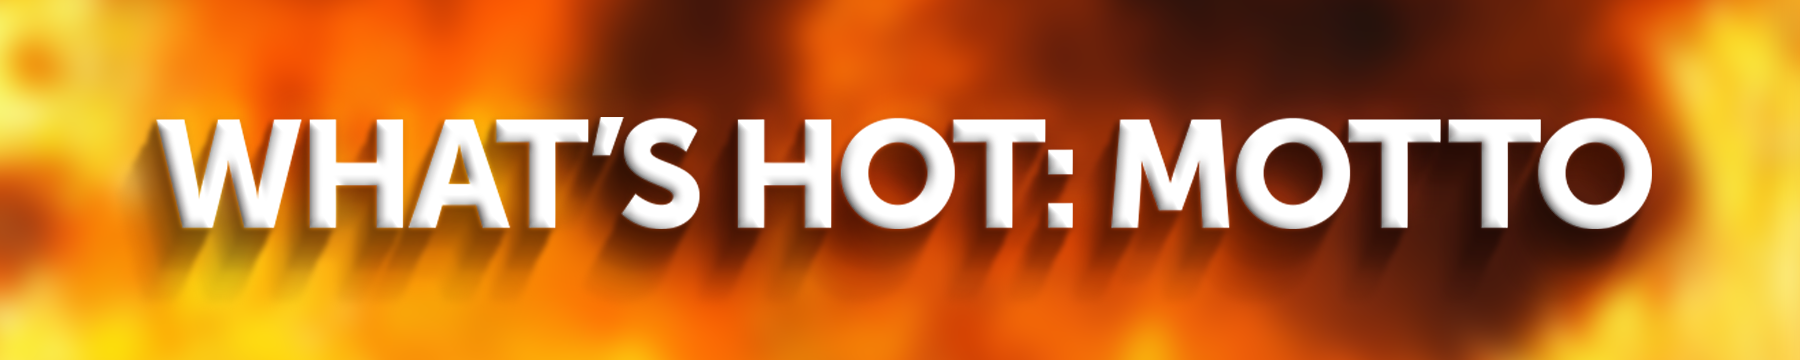 What's Hot: Motto